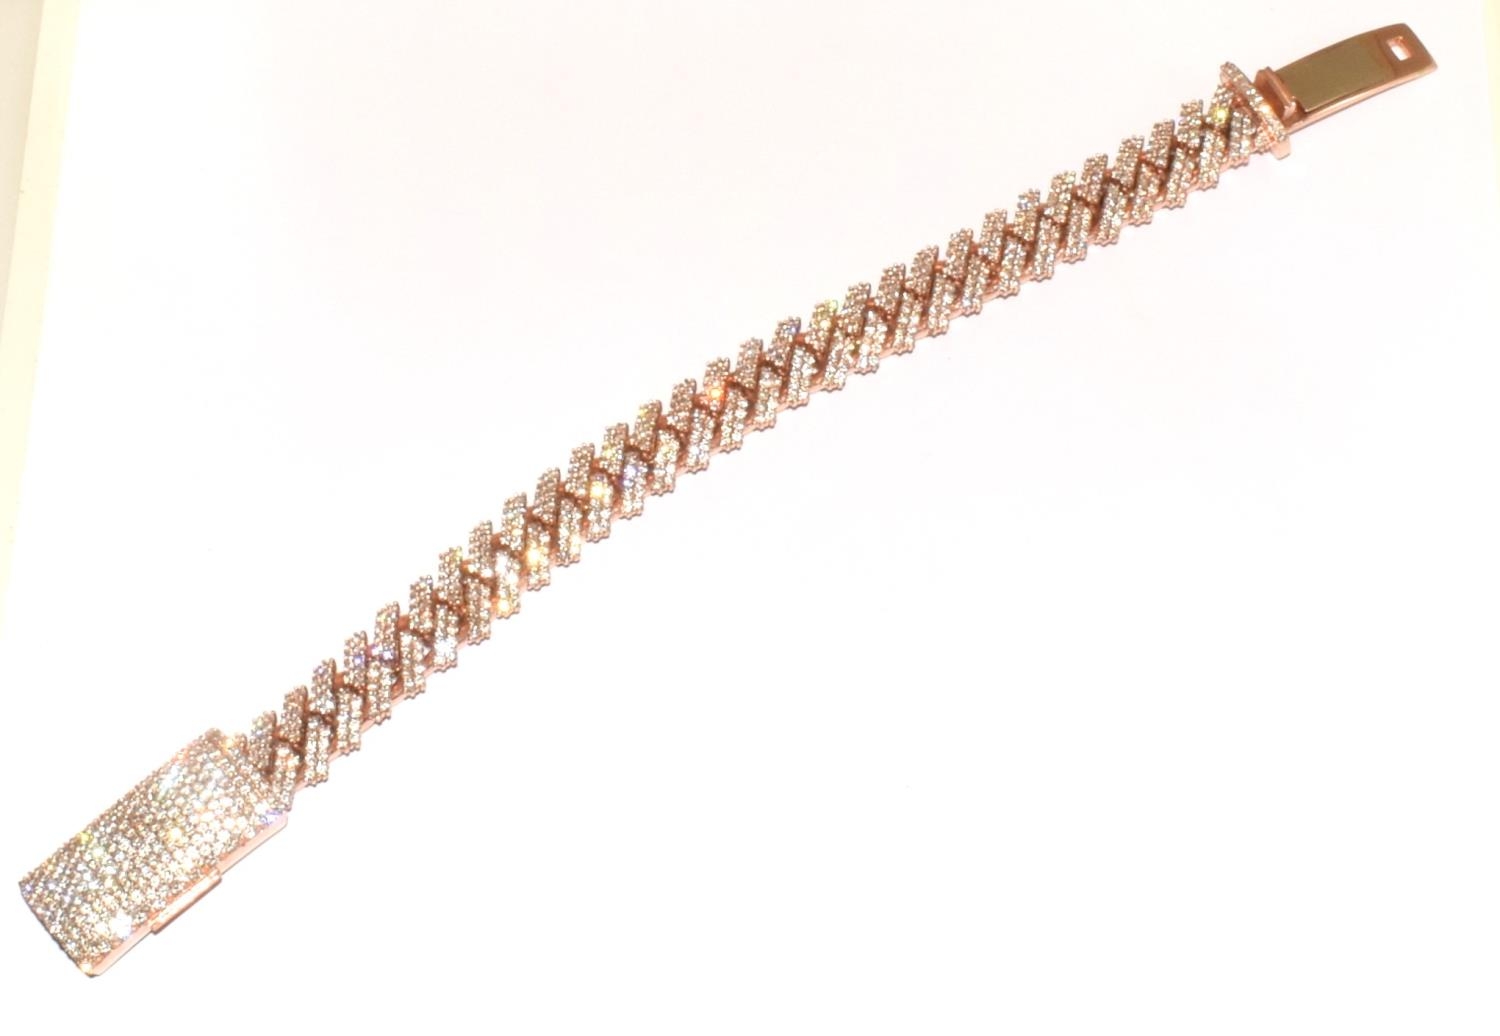 10ct rose gold Diamond encrusted bracelet set with approx 5ct diamonds in a herring bone pattern - Image 2 of 9